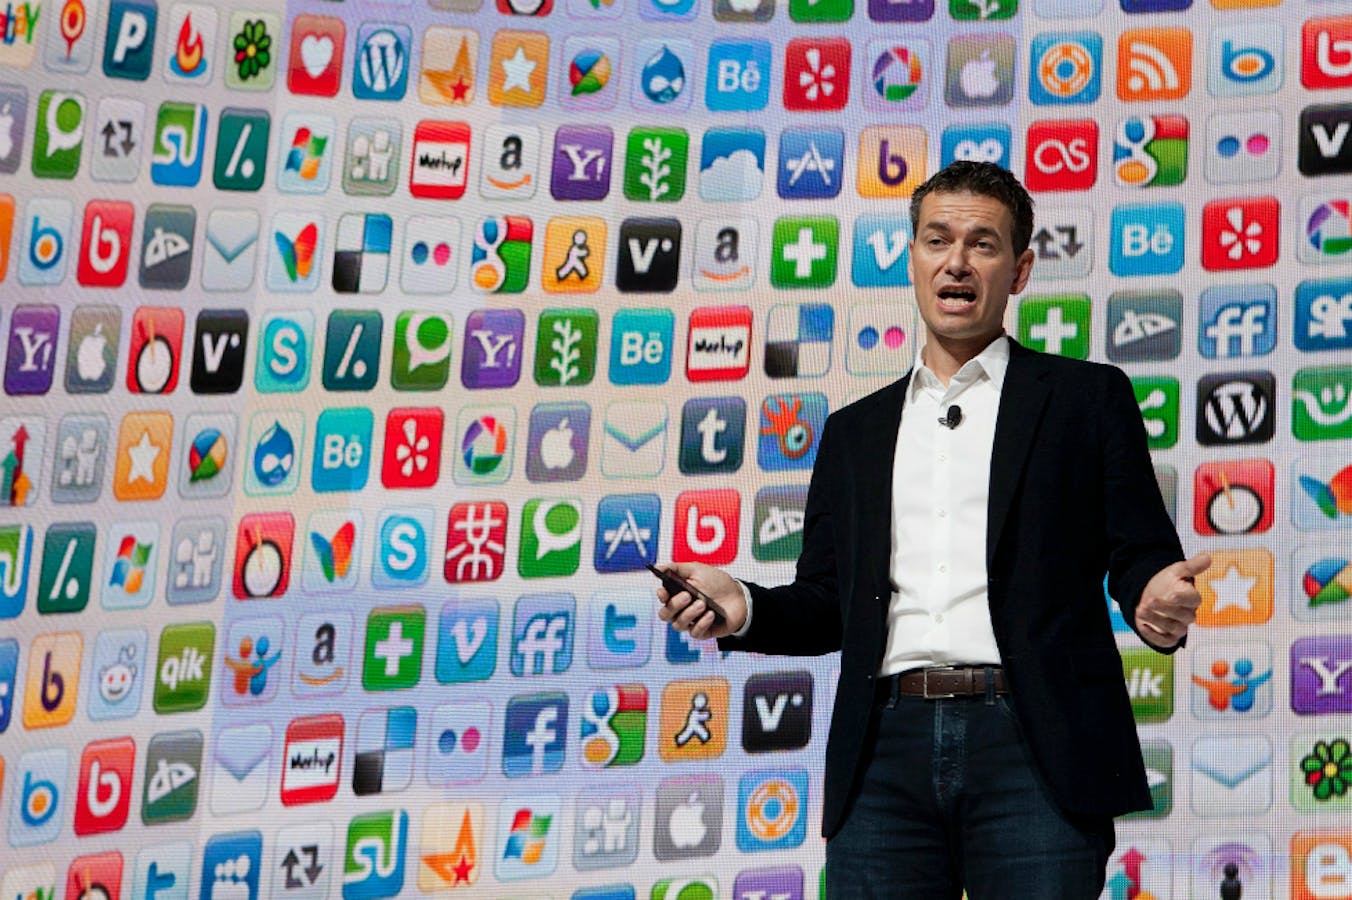 Robert Kyncl, head of content and business operations at YouTube. Photo by Bloomberg.